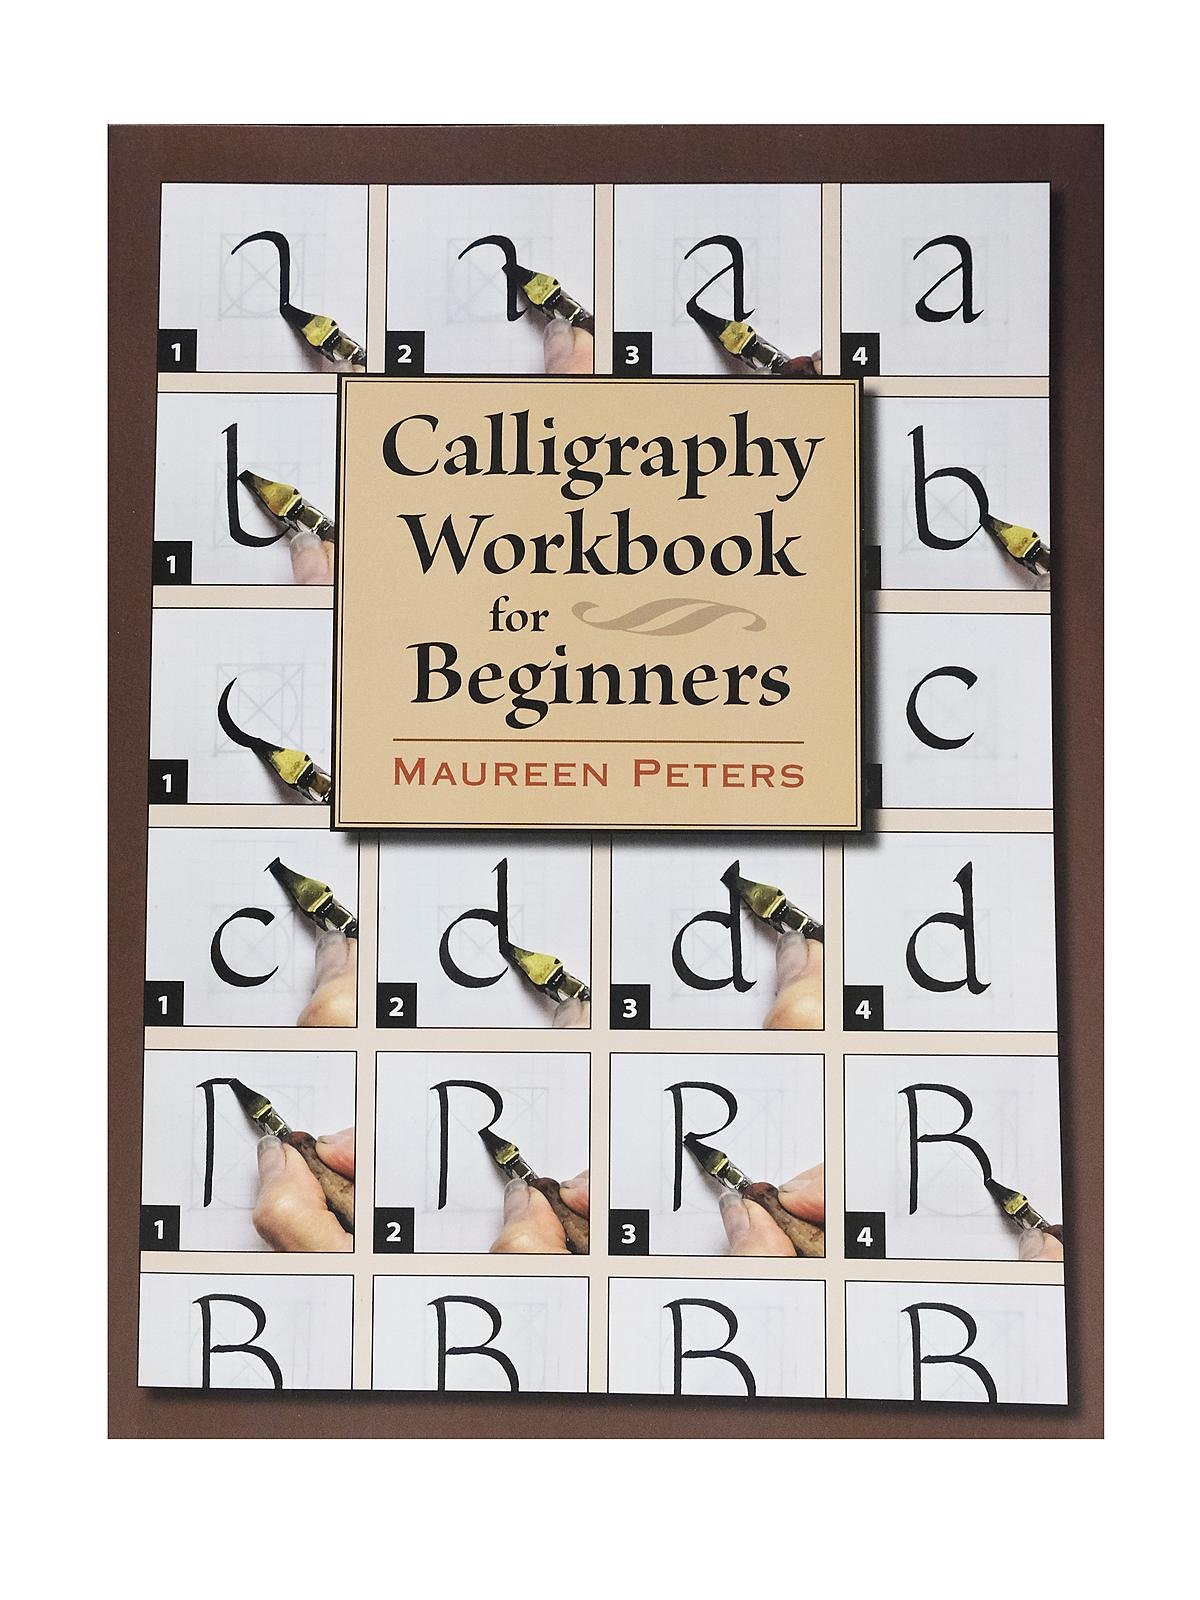 Stackpole Books - Calligraphy Workbook for Beginners